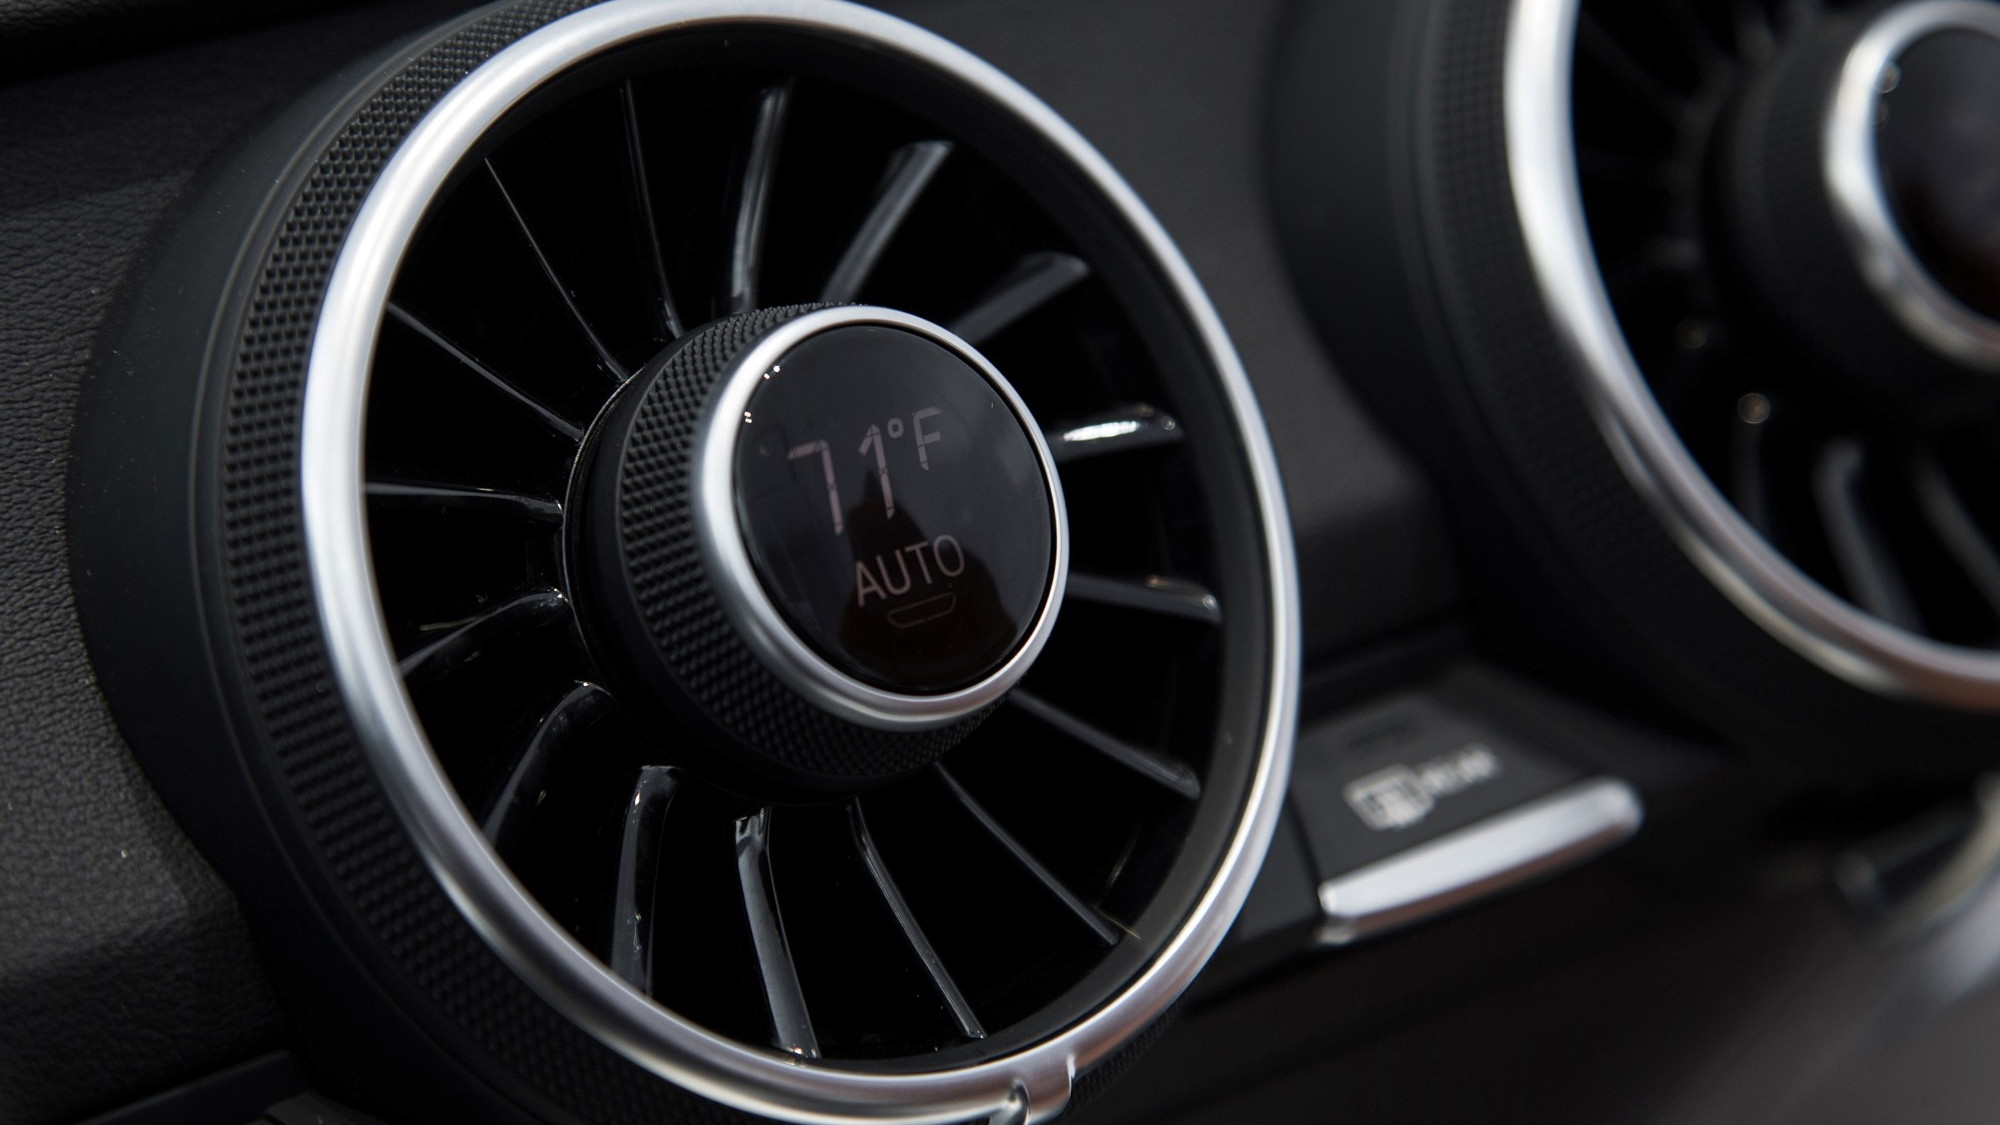 2015 Audi TT cabin previewed at CES